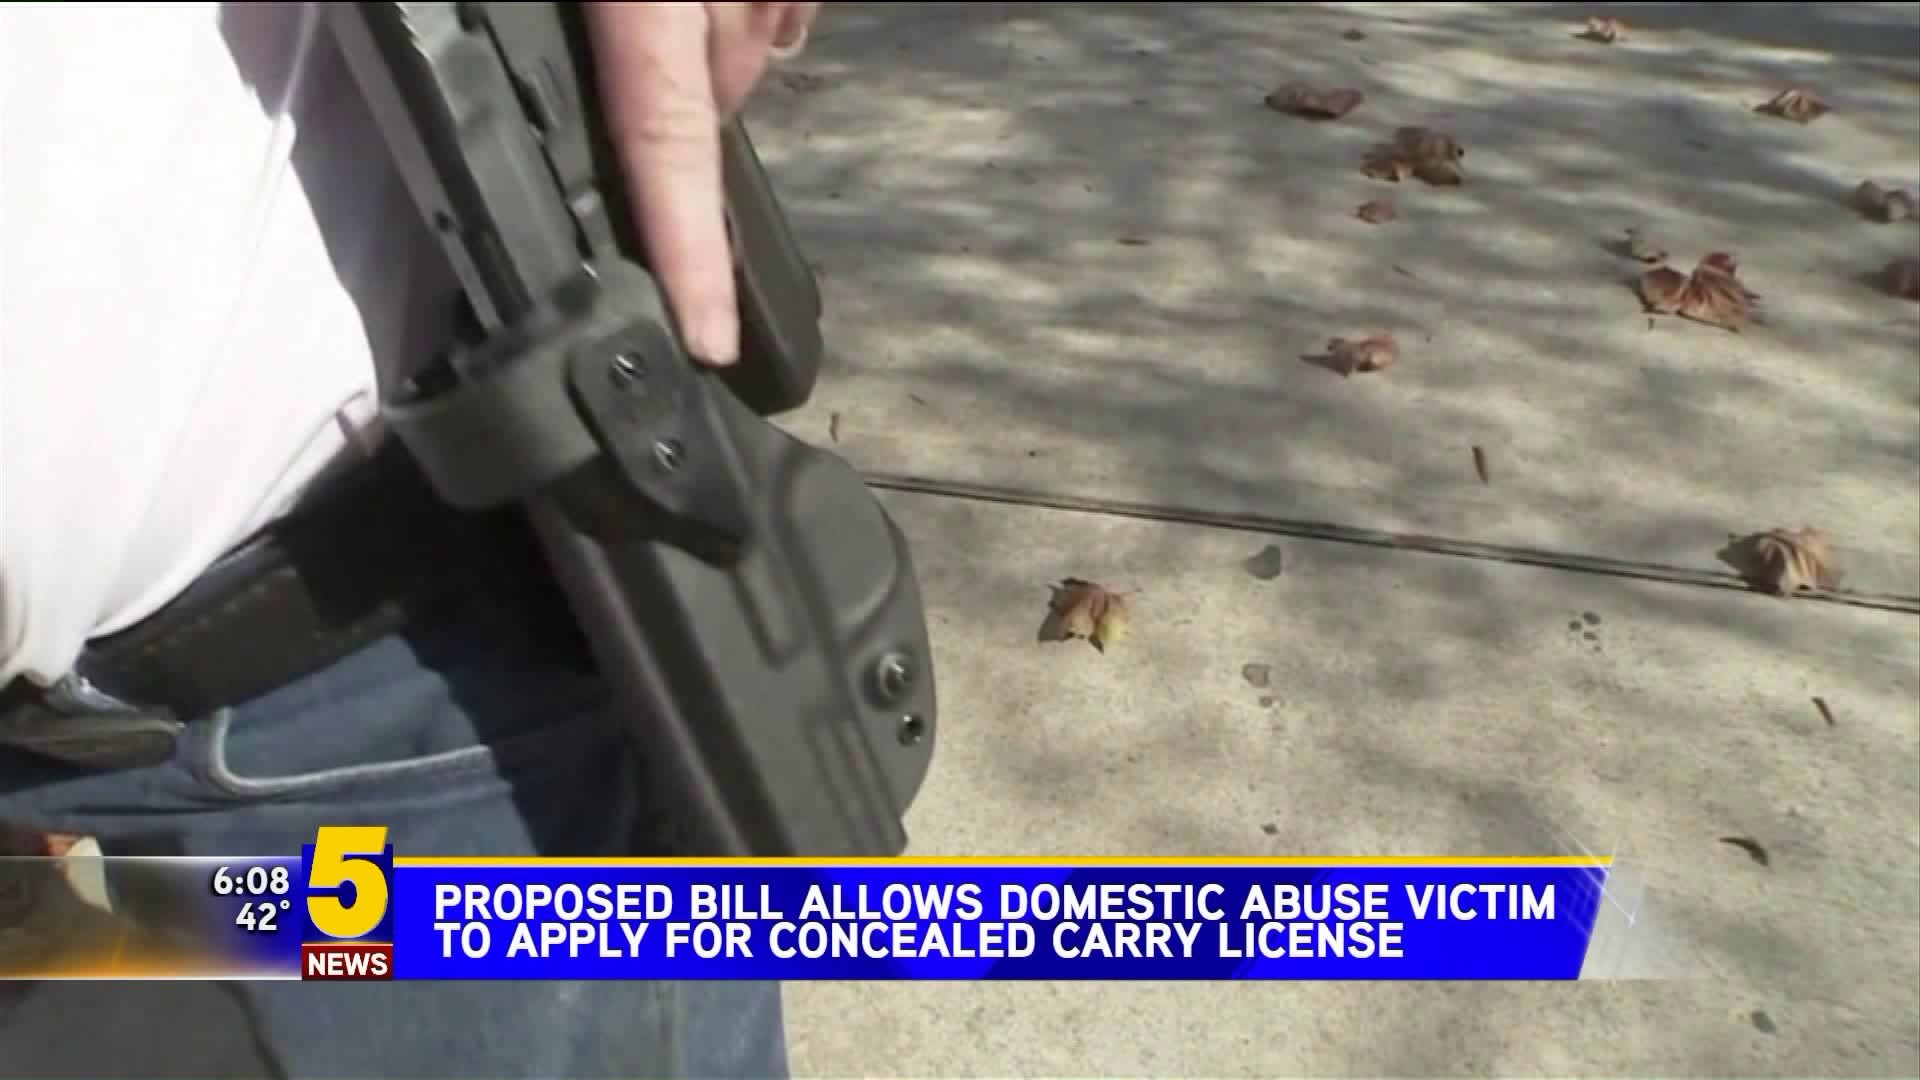 Proposed Bill Allows Domestic Abuse Victims To Apply for Concealed Carry License